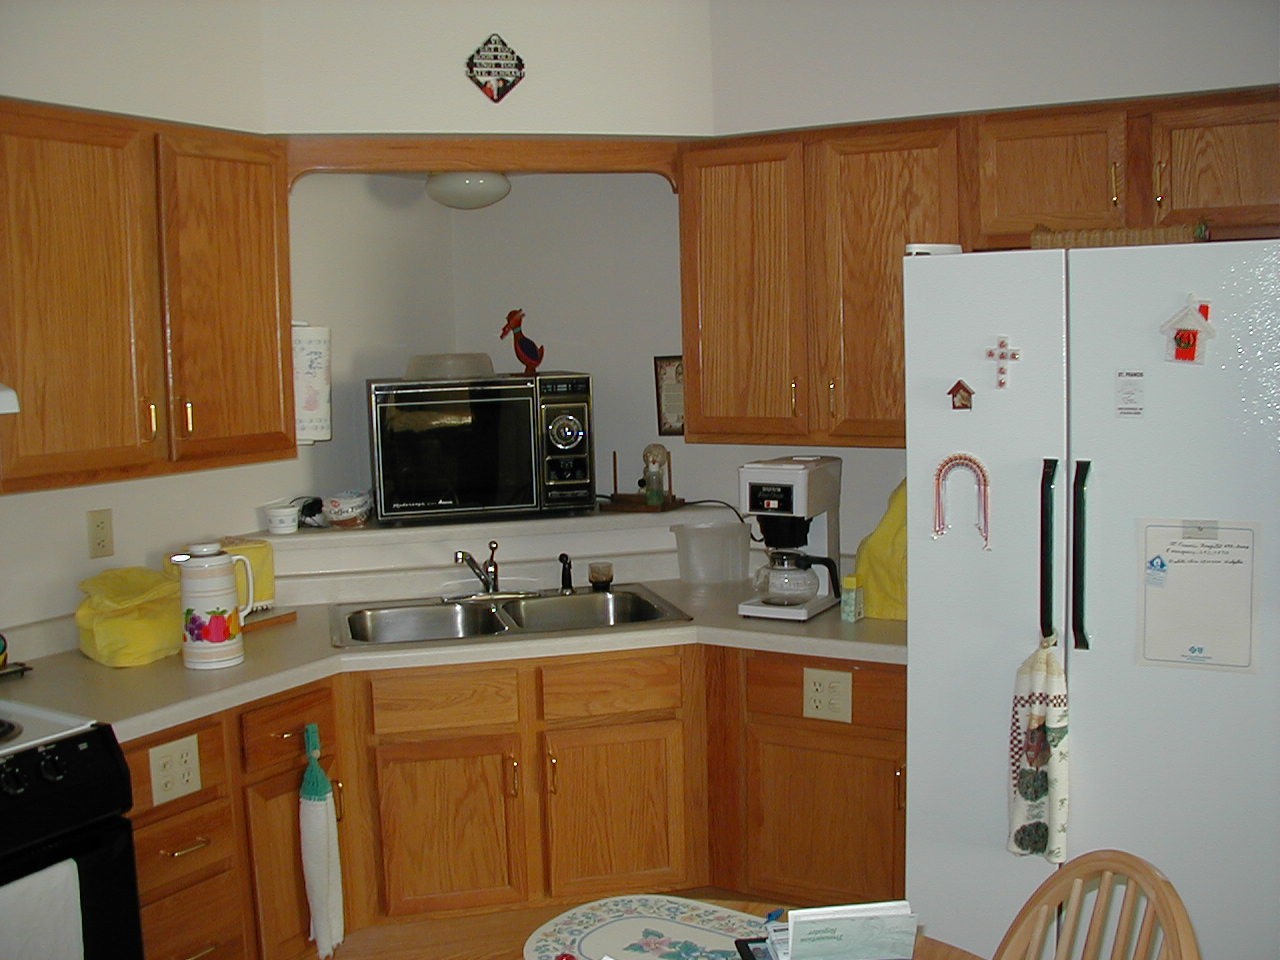 Kitchen area in an apartment unit of Appletree Court 